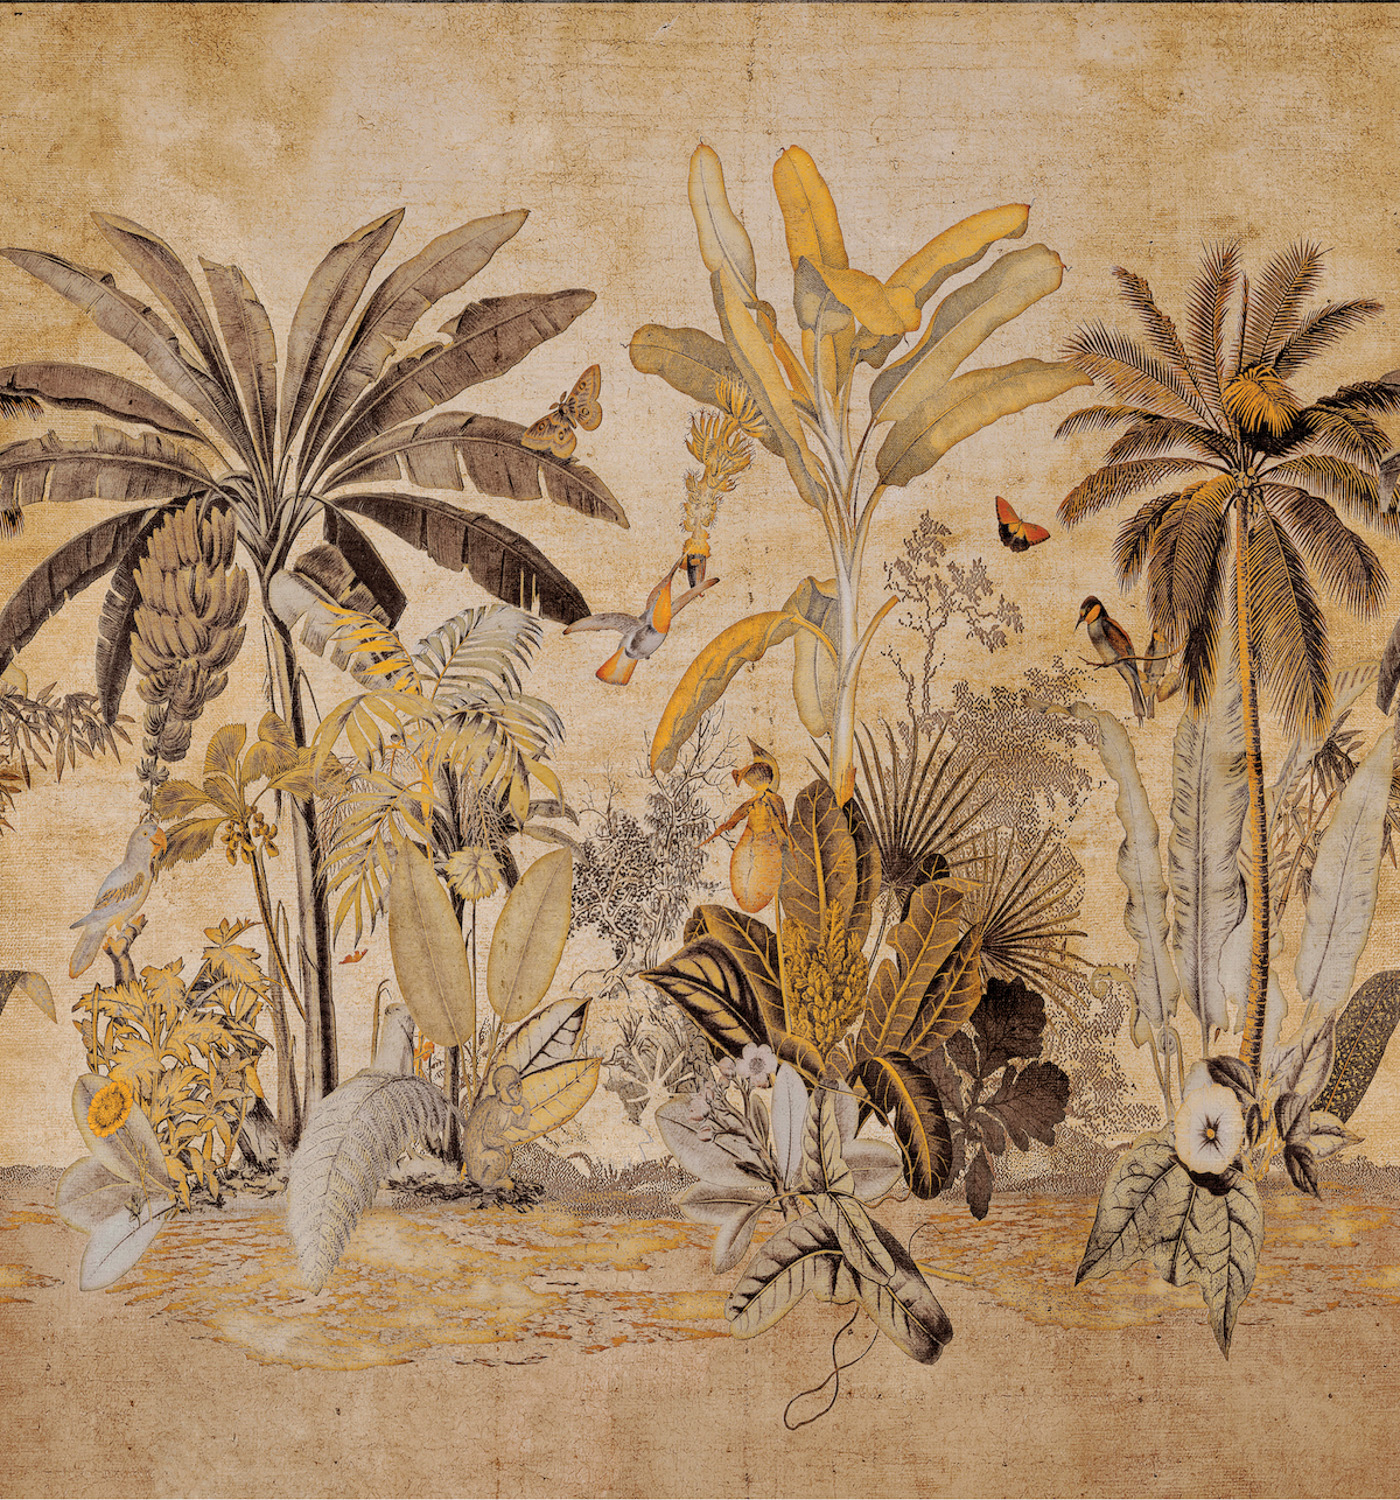 An orange-hued mural with tropical imagery. RED Winner.